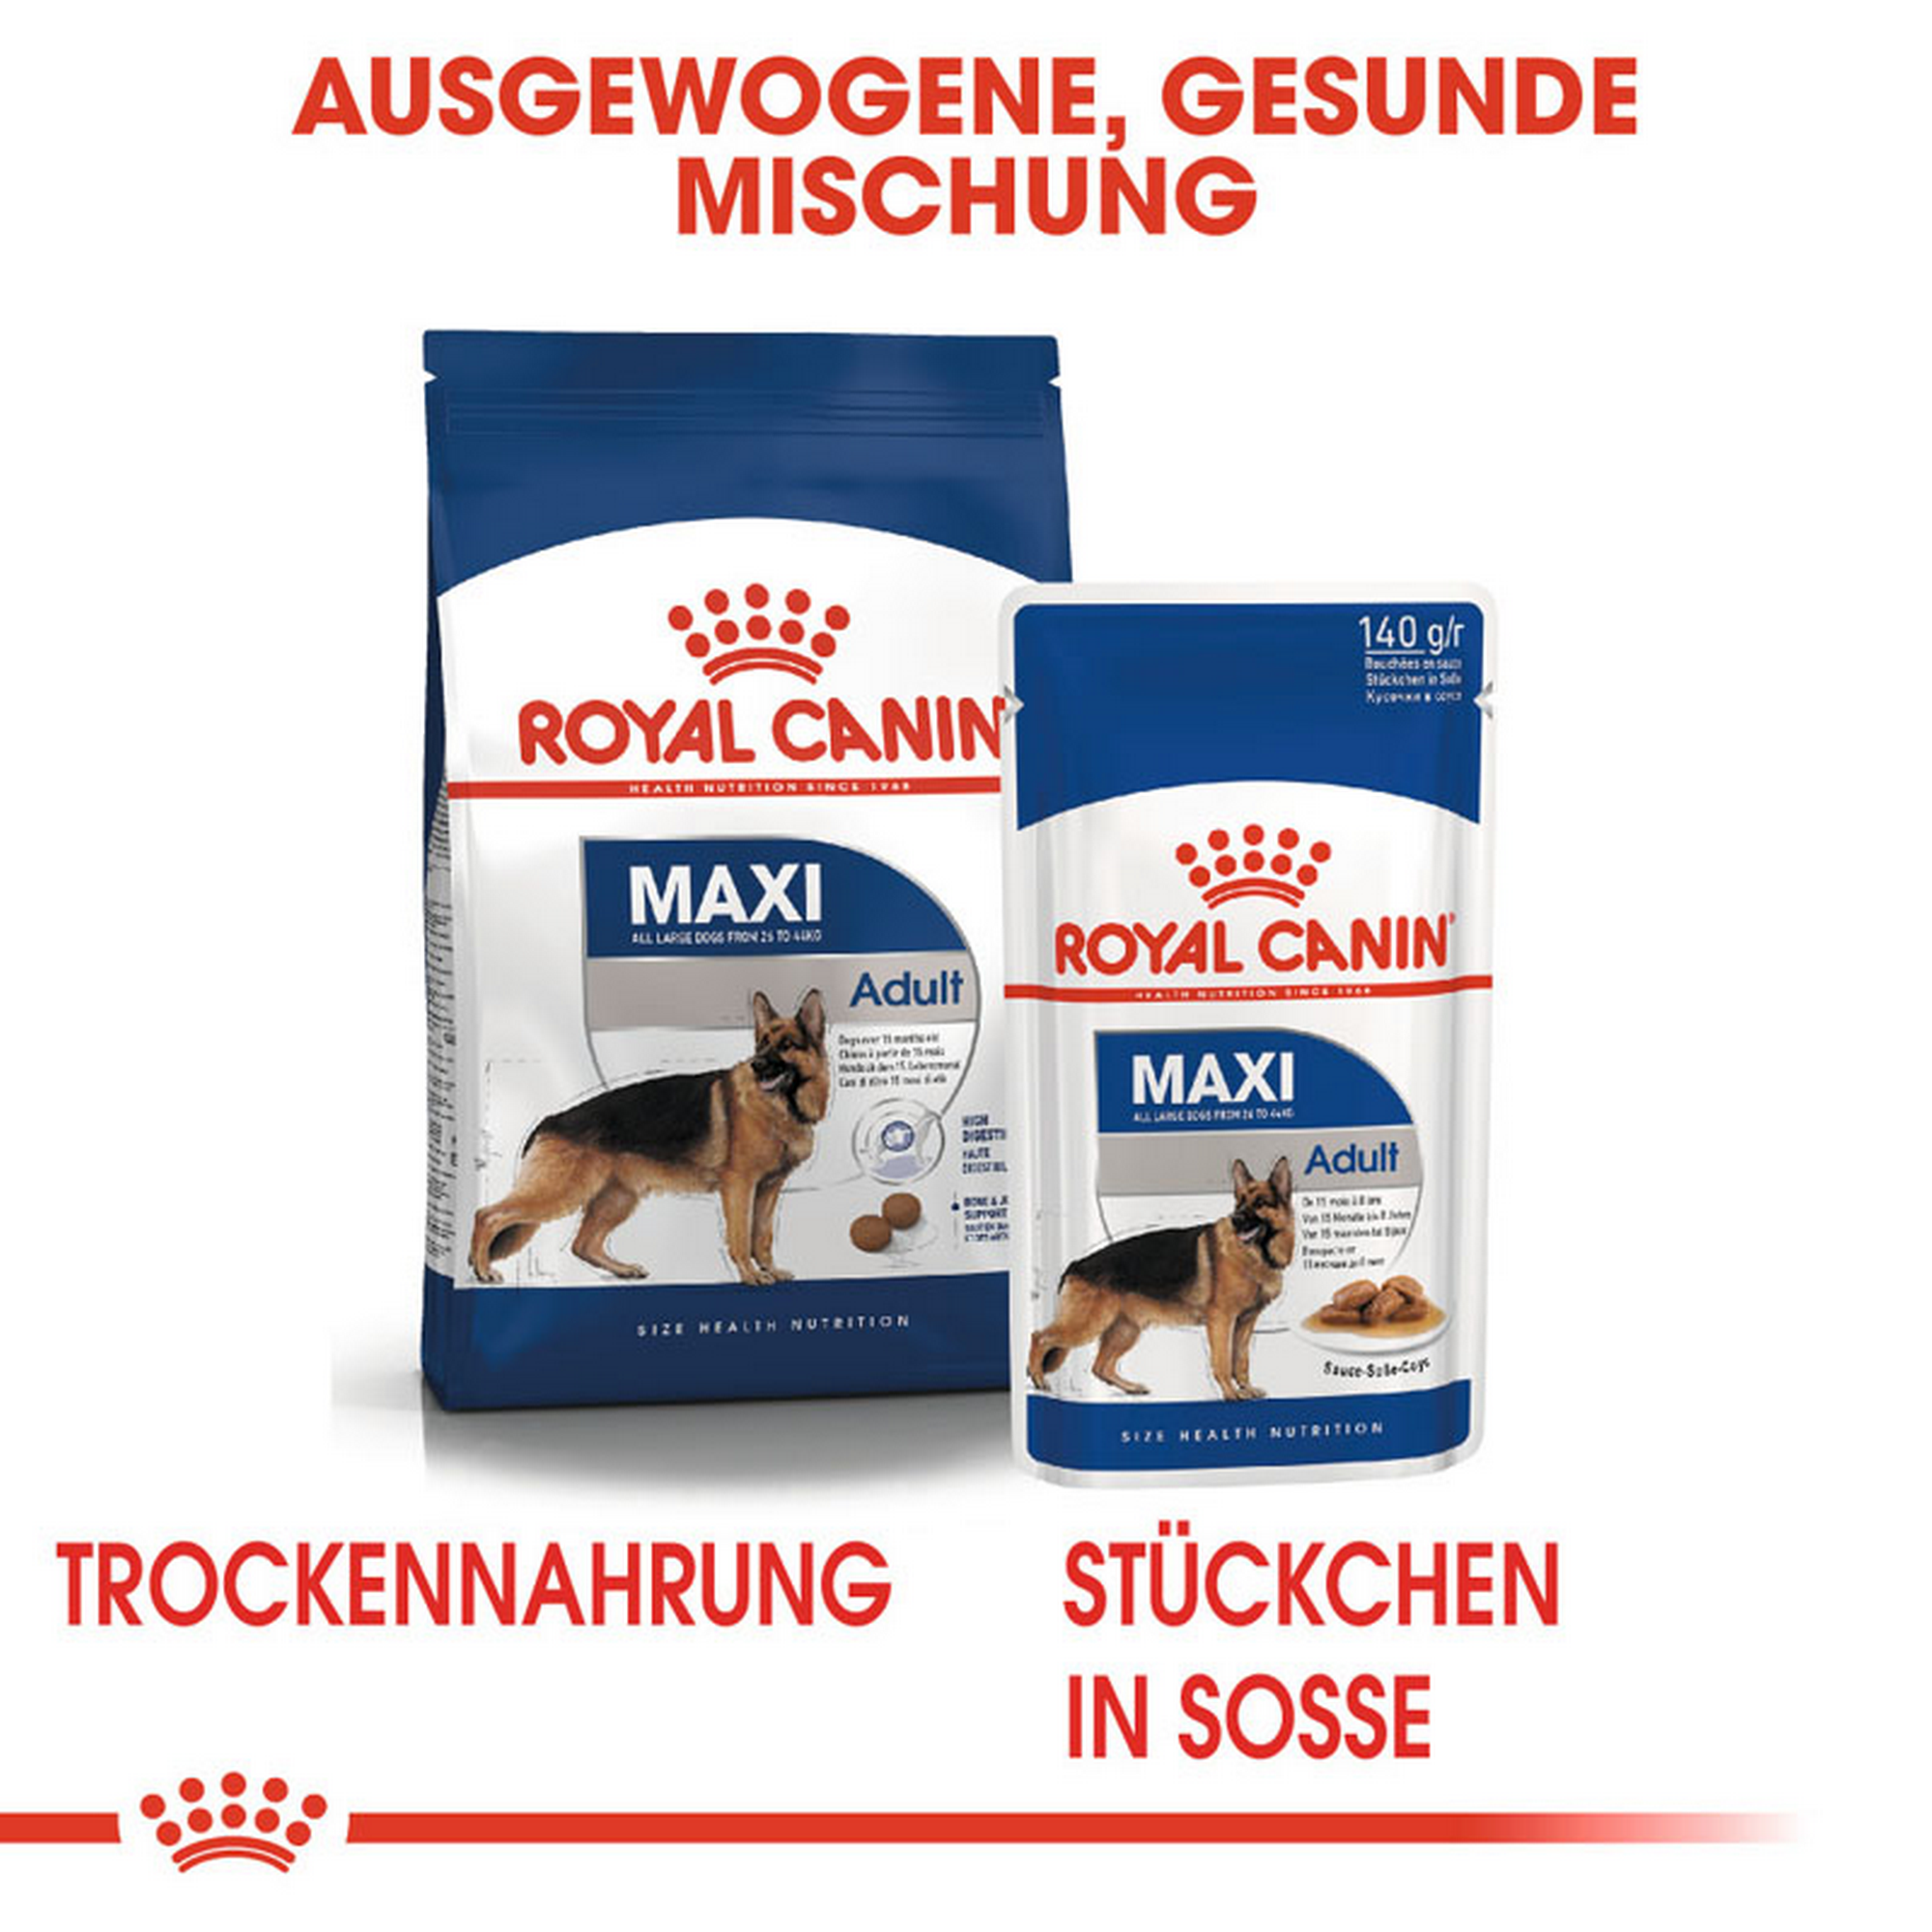 ROYAL CANIN MAXI ADULT Nassfutter für große Hunde + product picture